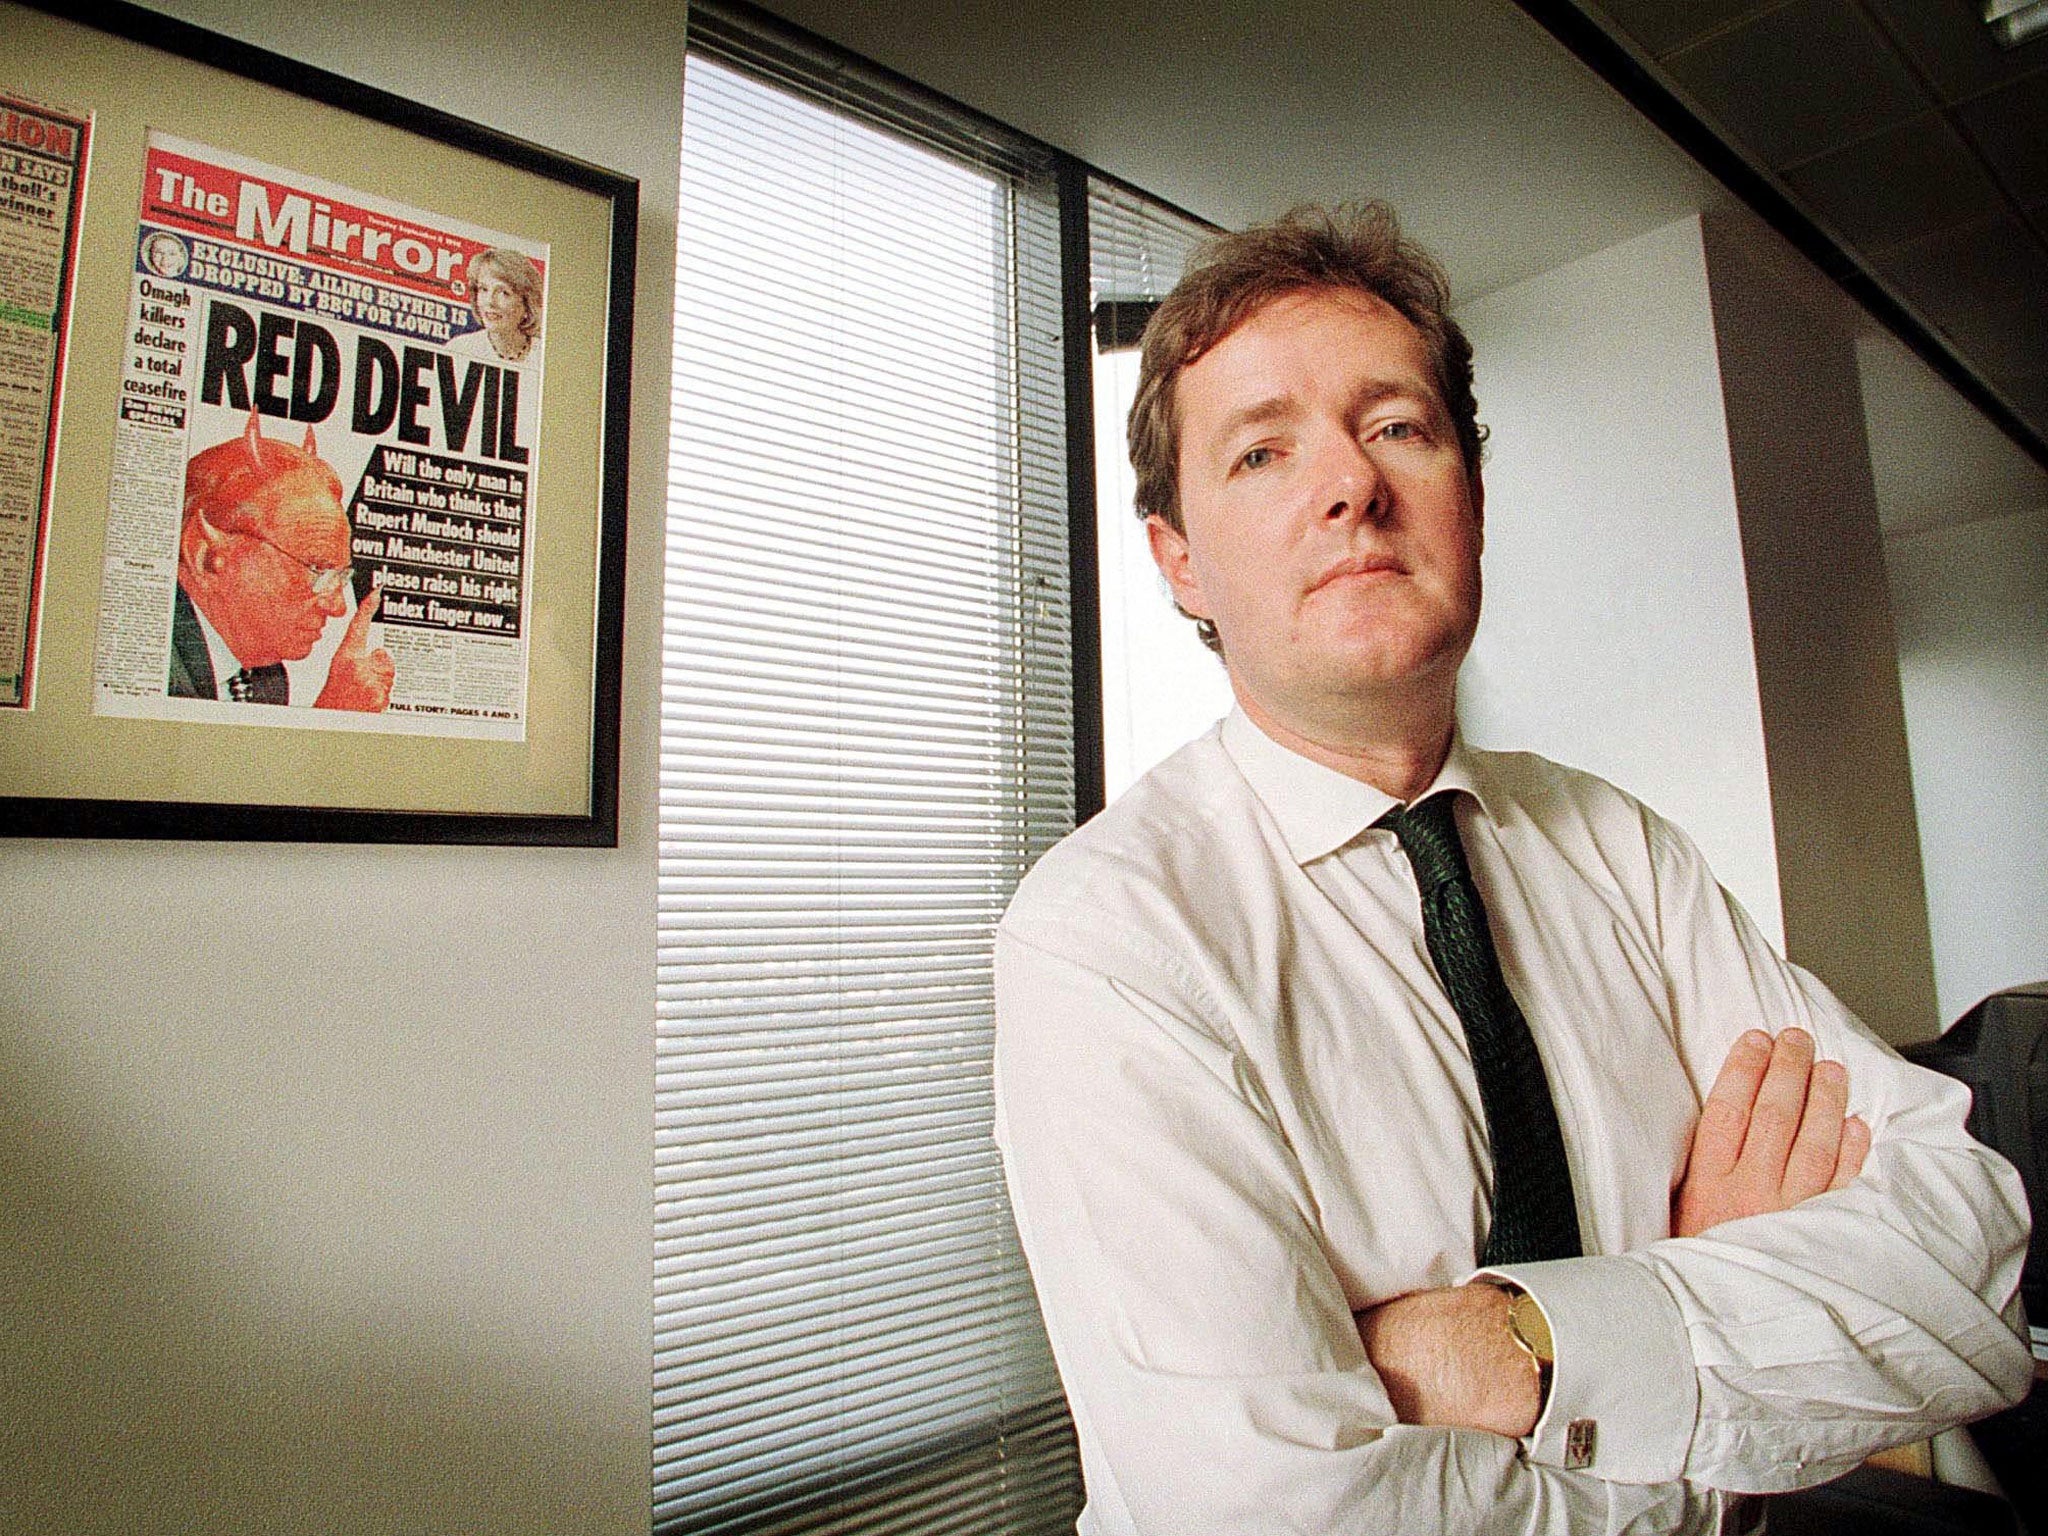 Piers Morgan was editor of The Mirror in the 90s